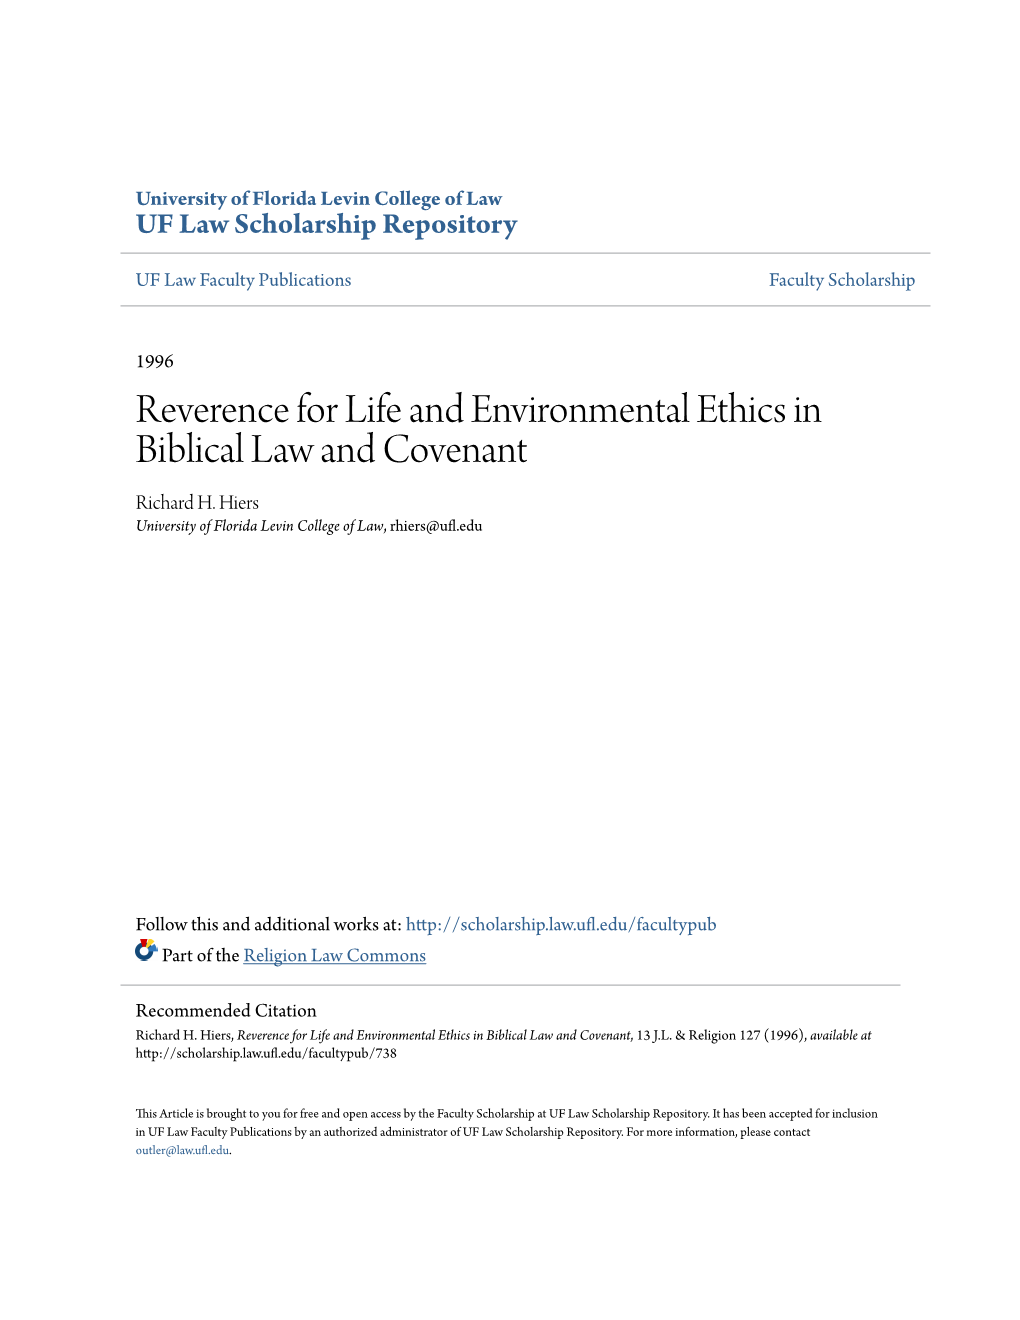 Reverence for Life and Environmental Ethics in Biblical Law and Covenant Richard H